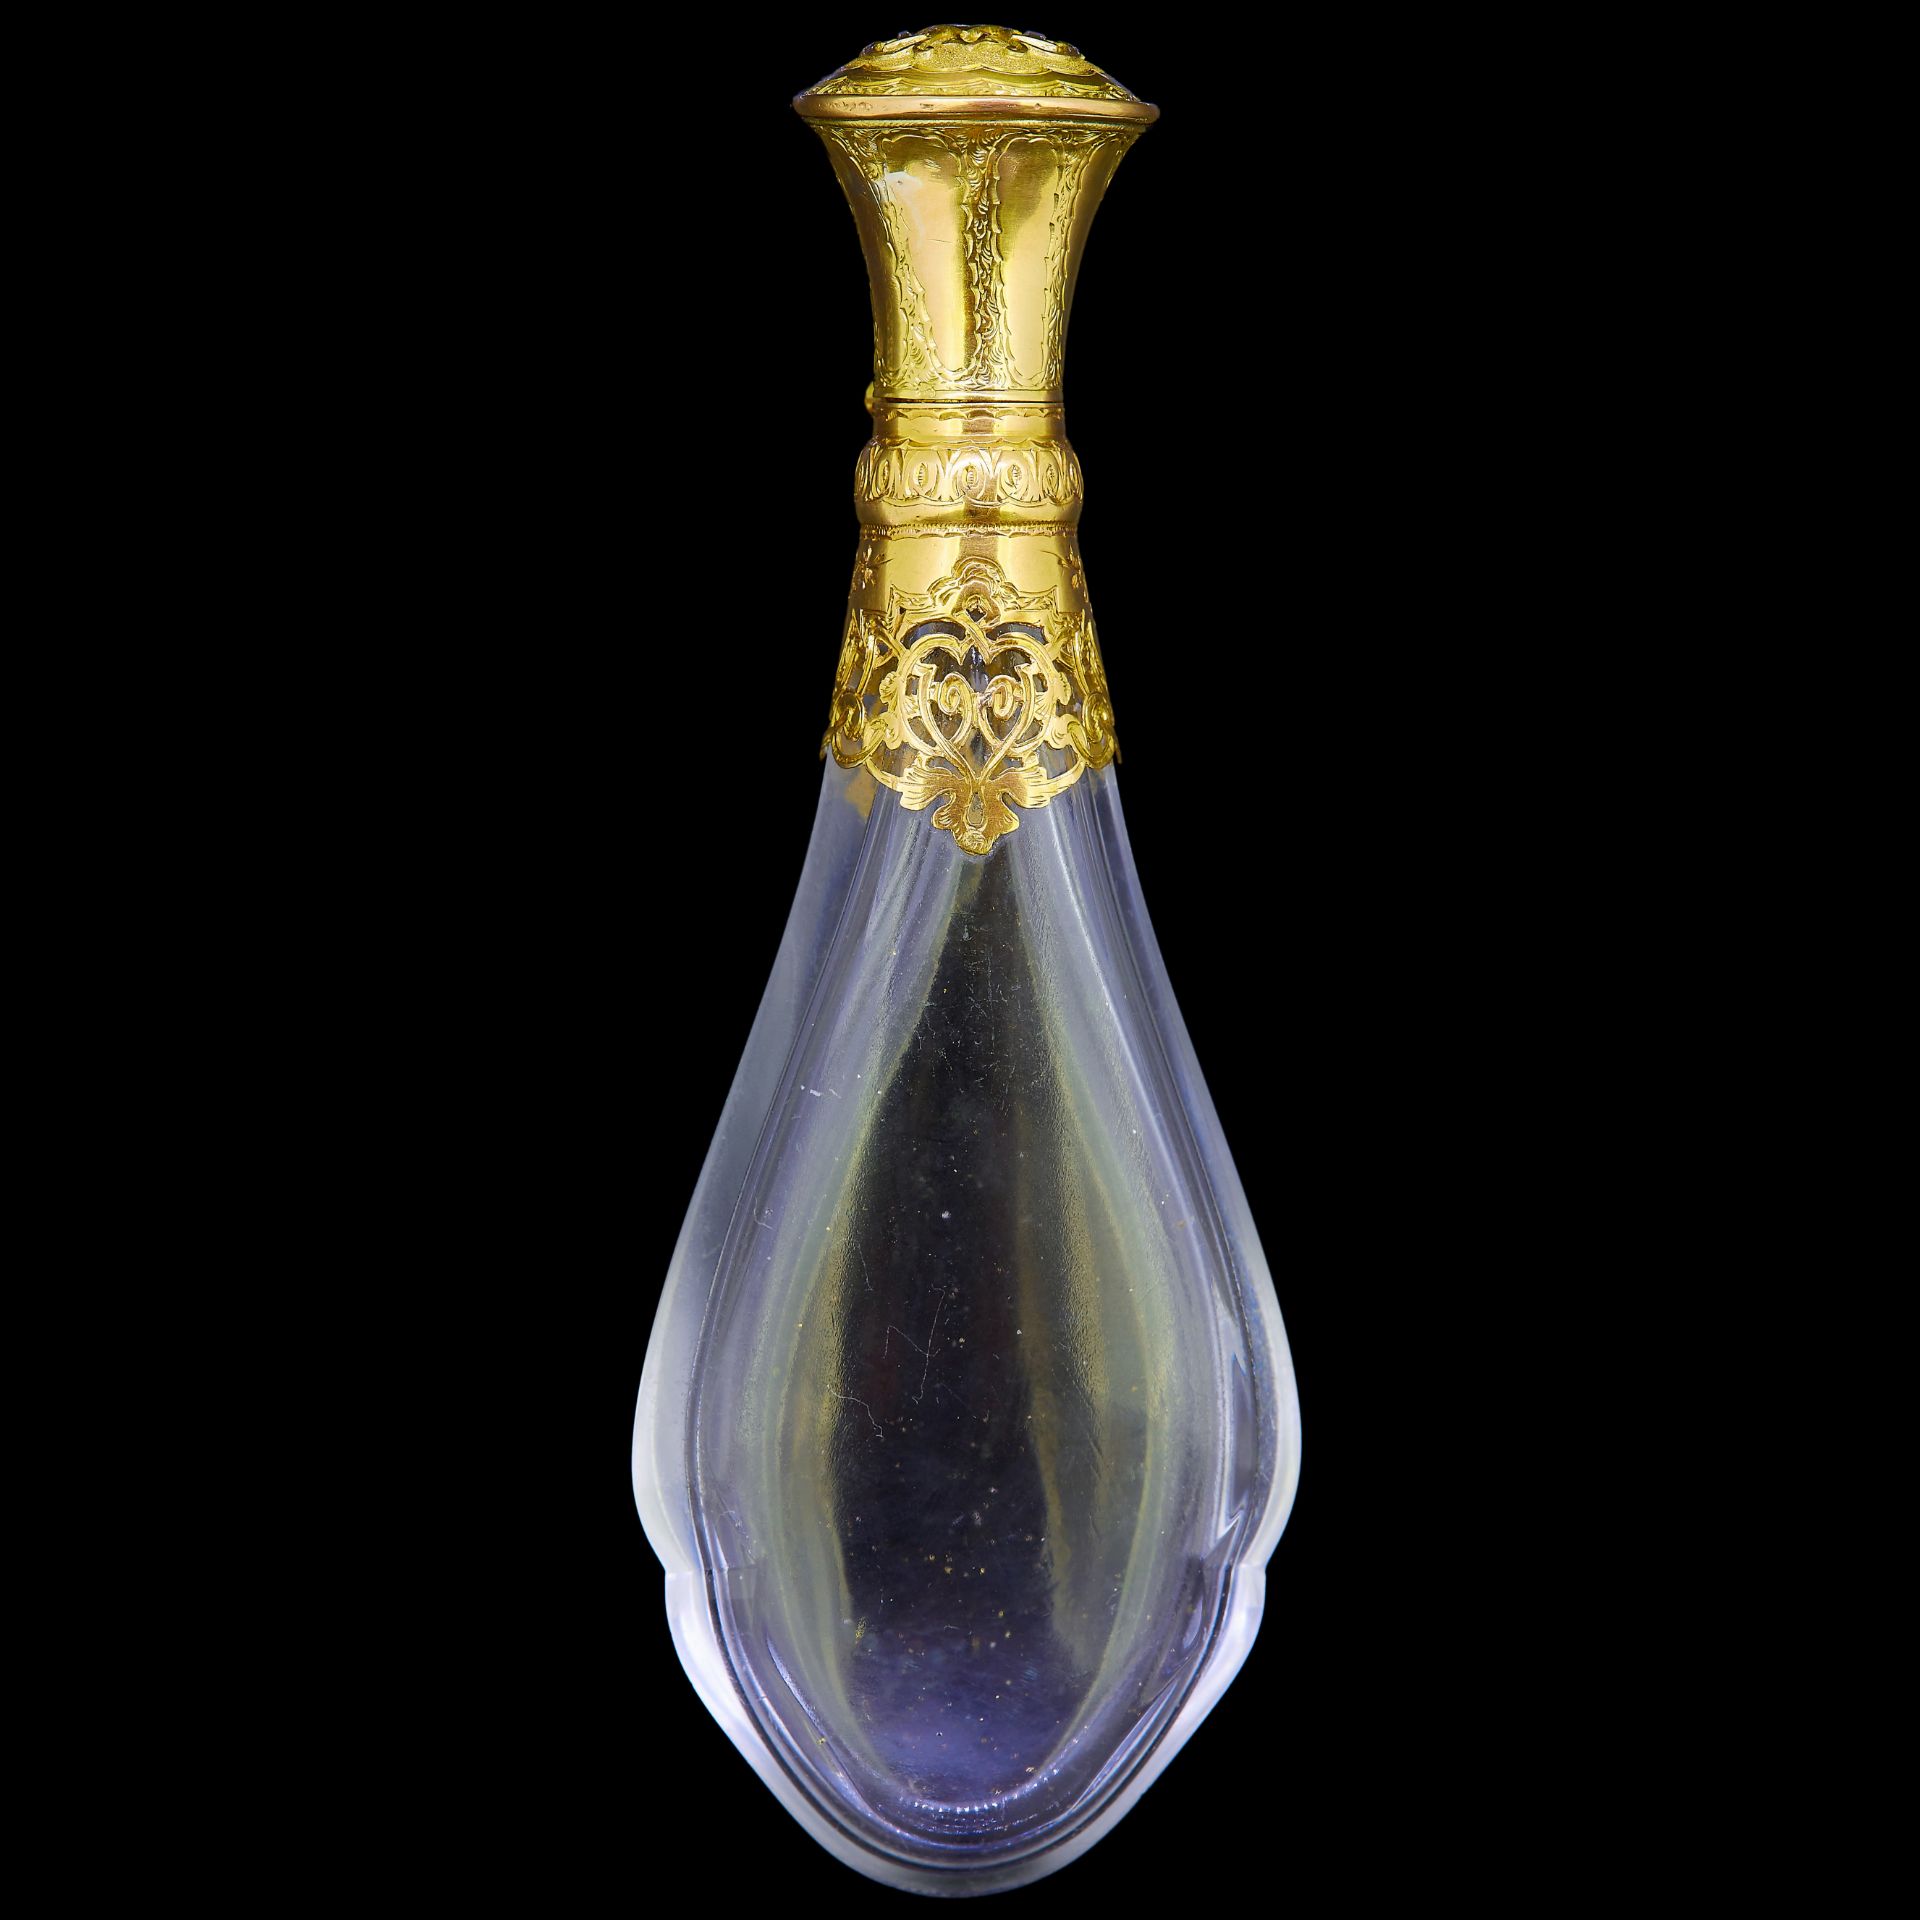 ANTIQUE ROCK CRYSTAL AND GOLD PERFUM BOTTLE